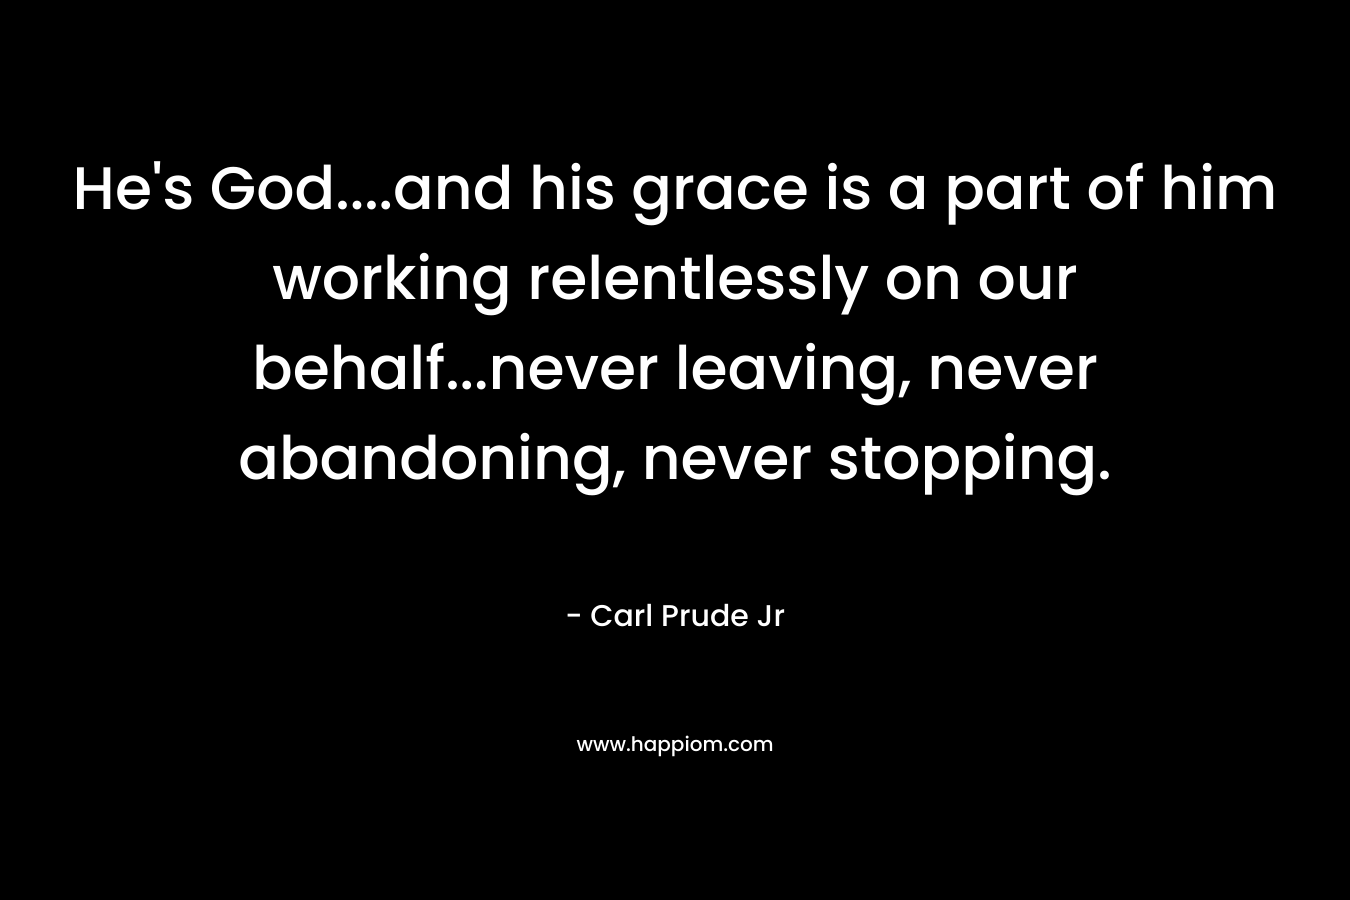 He's God....and his grace is a part of him working relentlessly on our behalf...never leaving, never abandoning, never stopping.